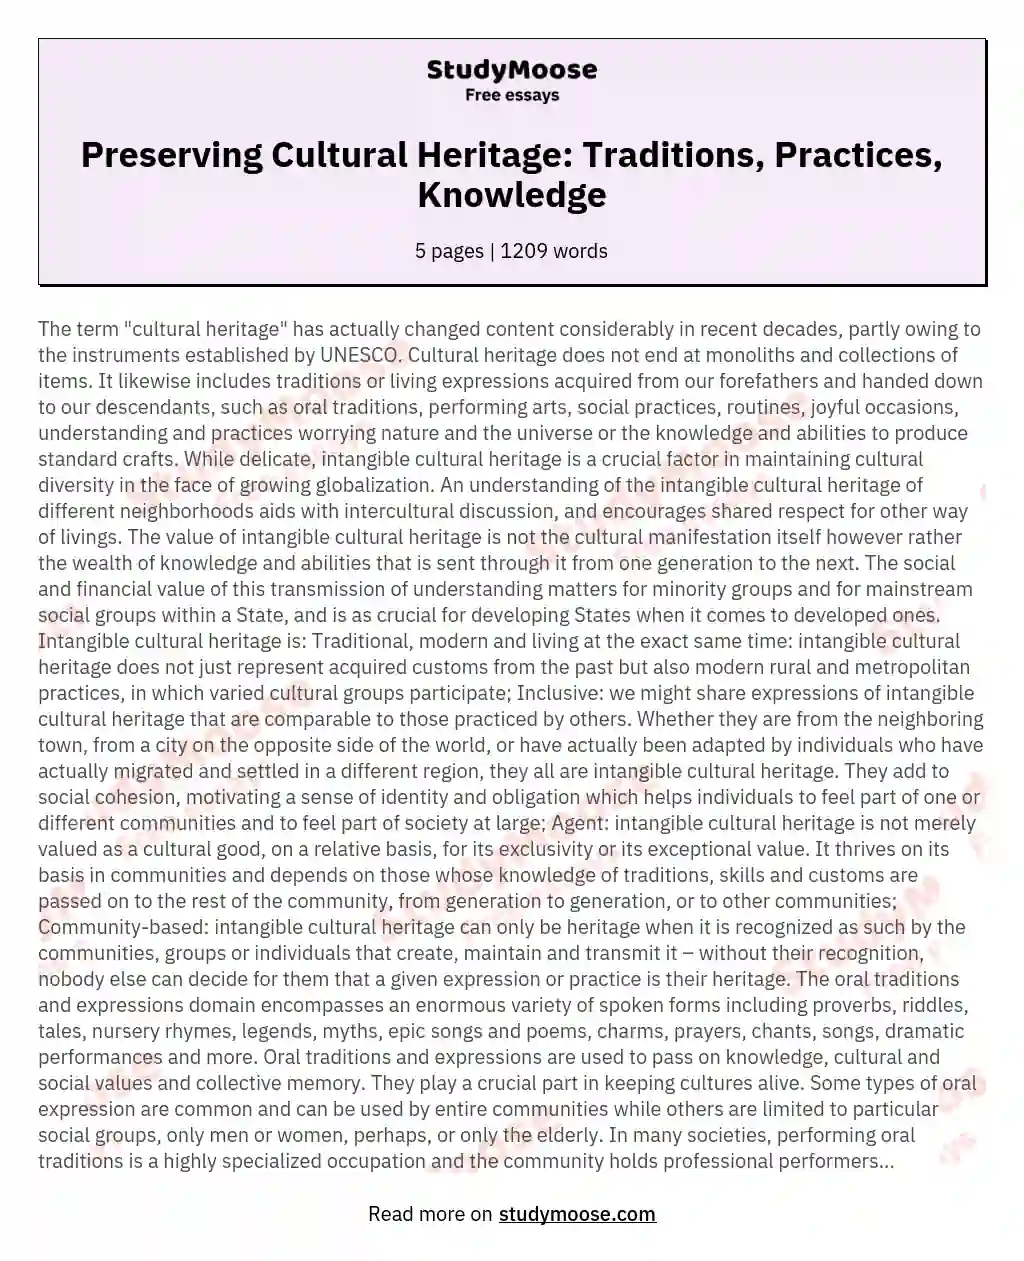 Preserving Cultural Heritage: Traditions, Practices, Knowledge essay